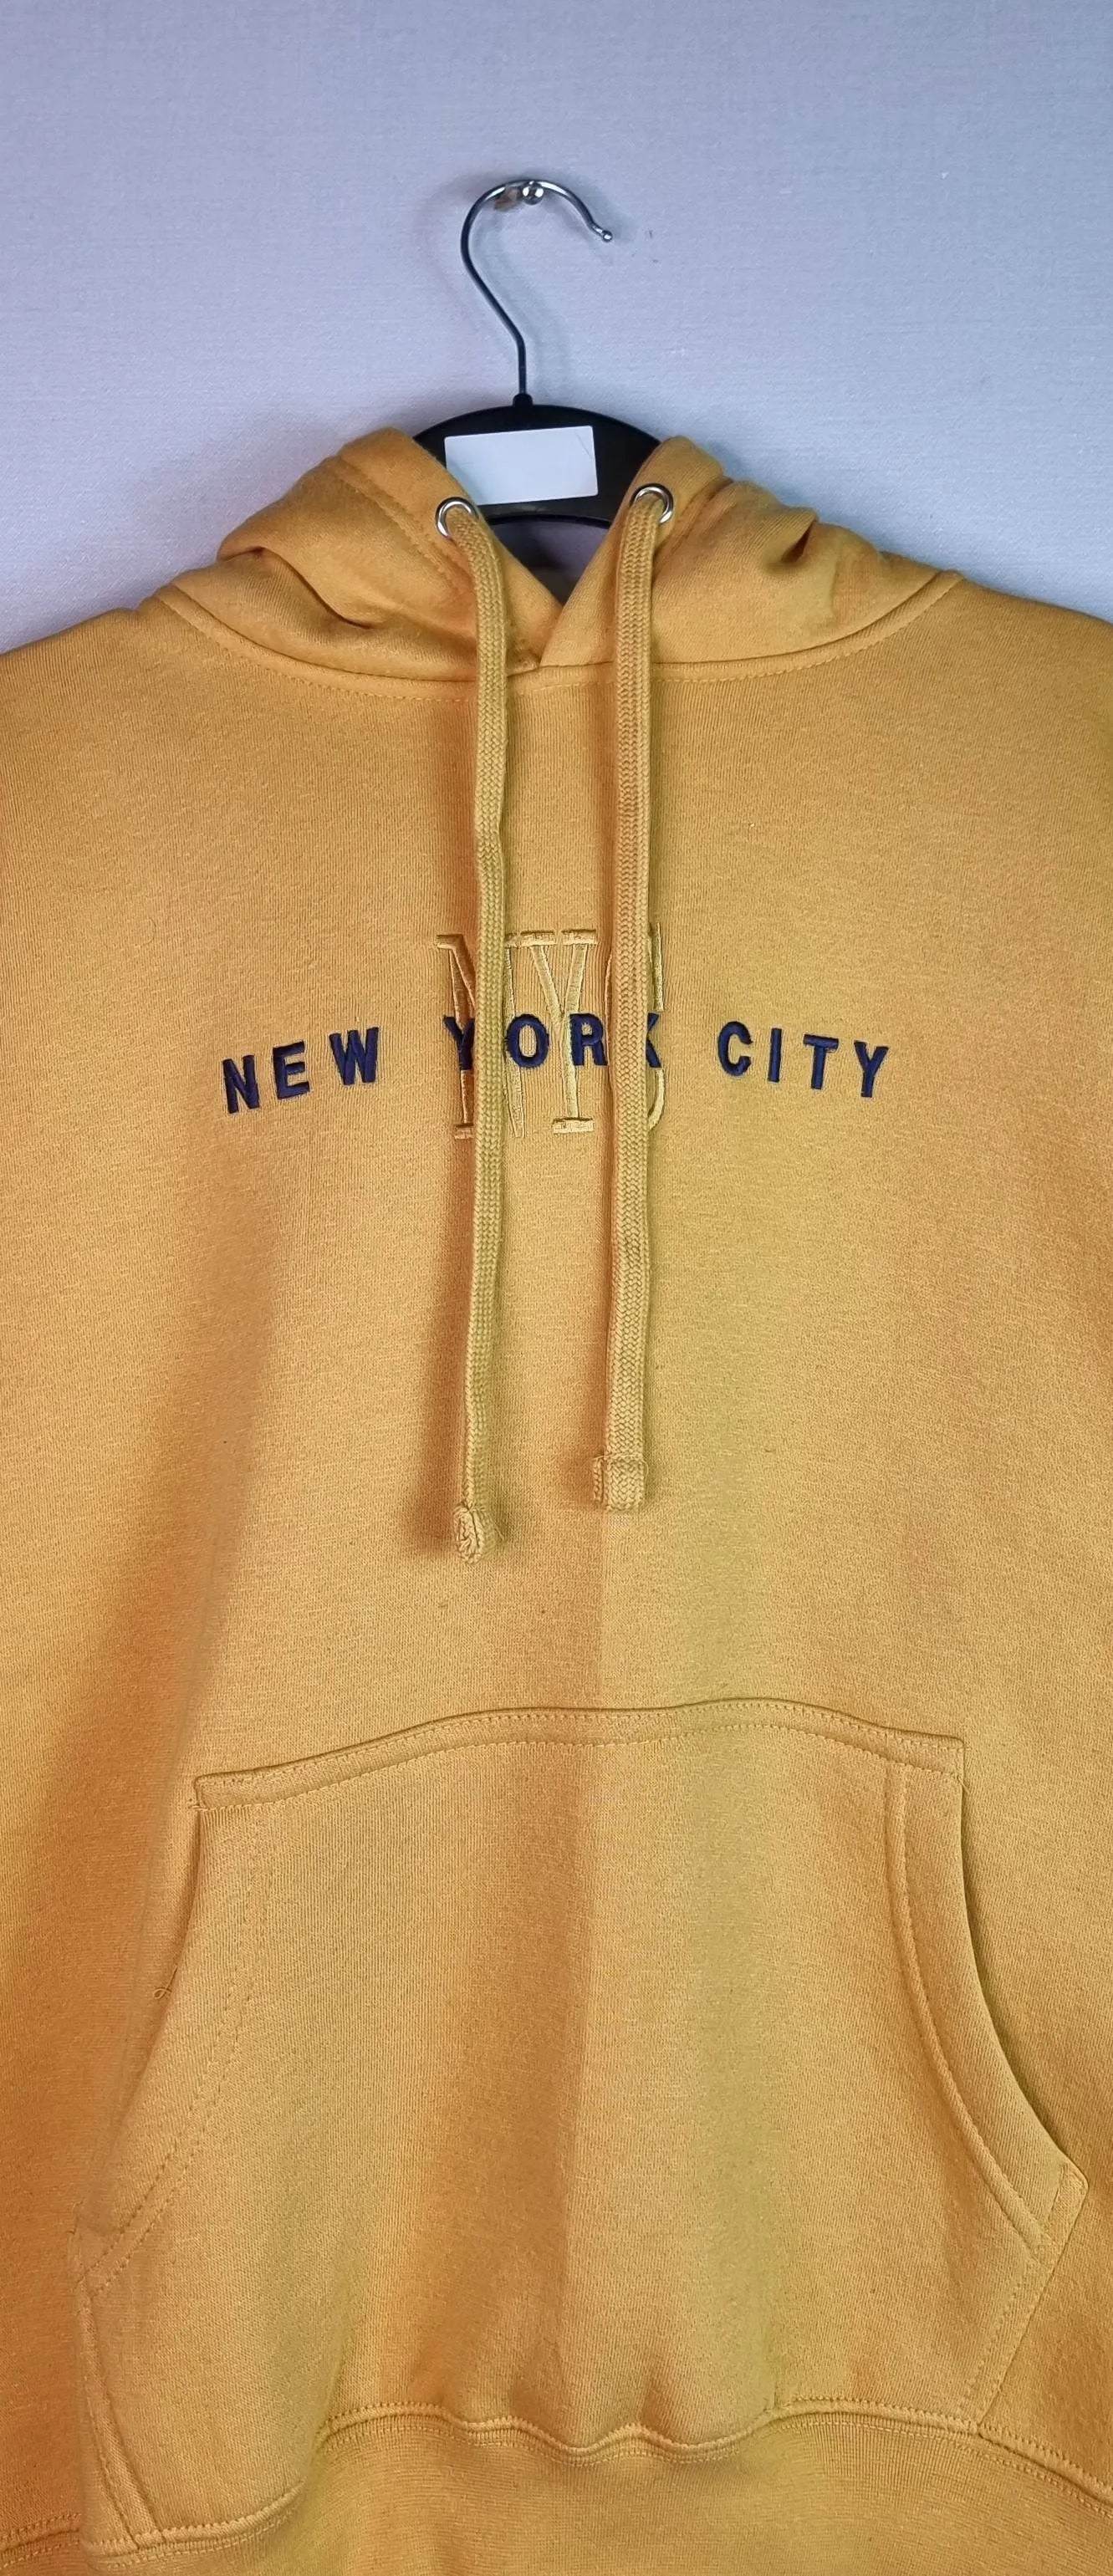  Brighten your day: Stay warm and visible in this cheerful unisex yellow hoodie from Go For It New York.Wrap yourself in the comfort of this NYC-inspired hoodie, wherever you are.